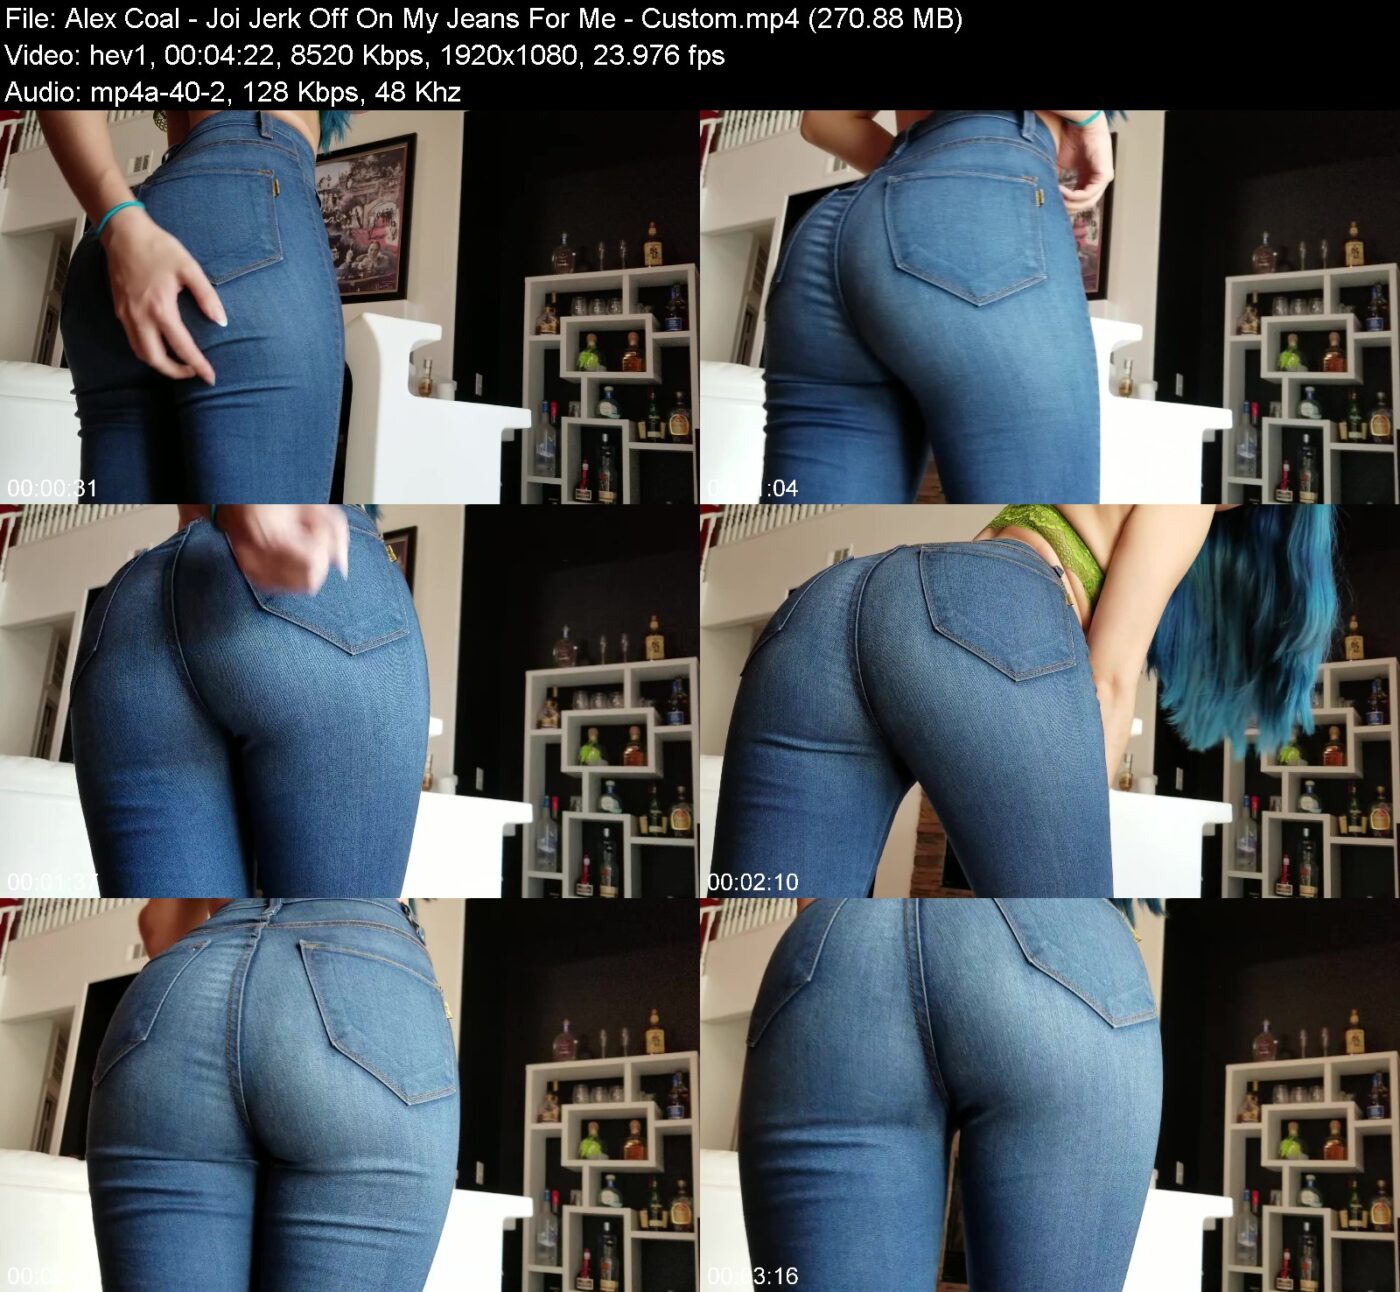 Actress: Alex Coal. Title and Studio: Joi Jerk Off On My Jeans For Me – Custom